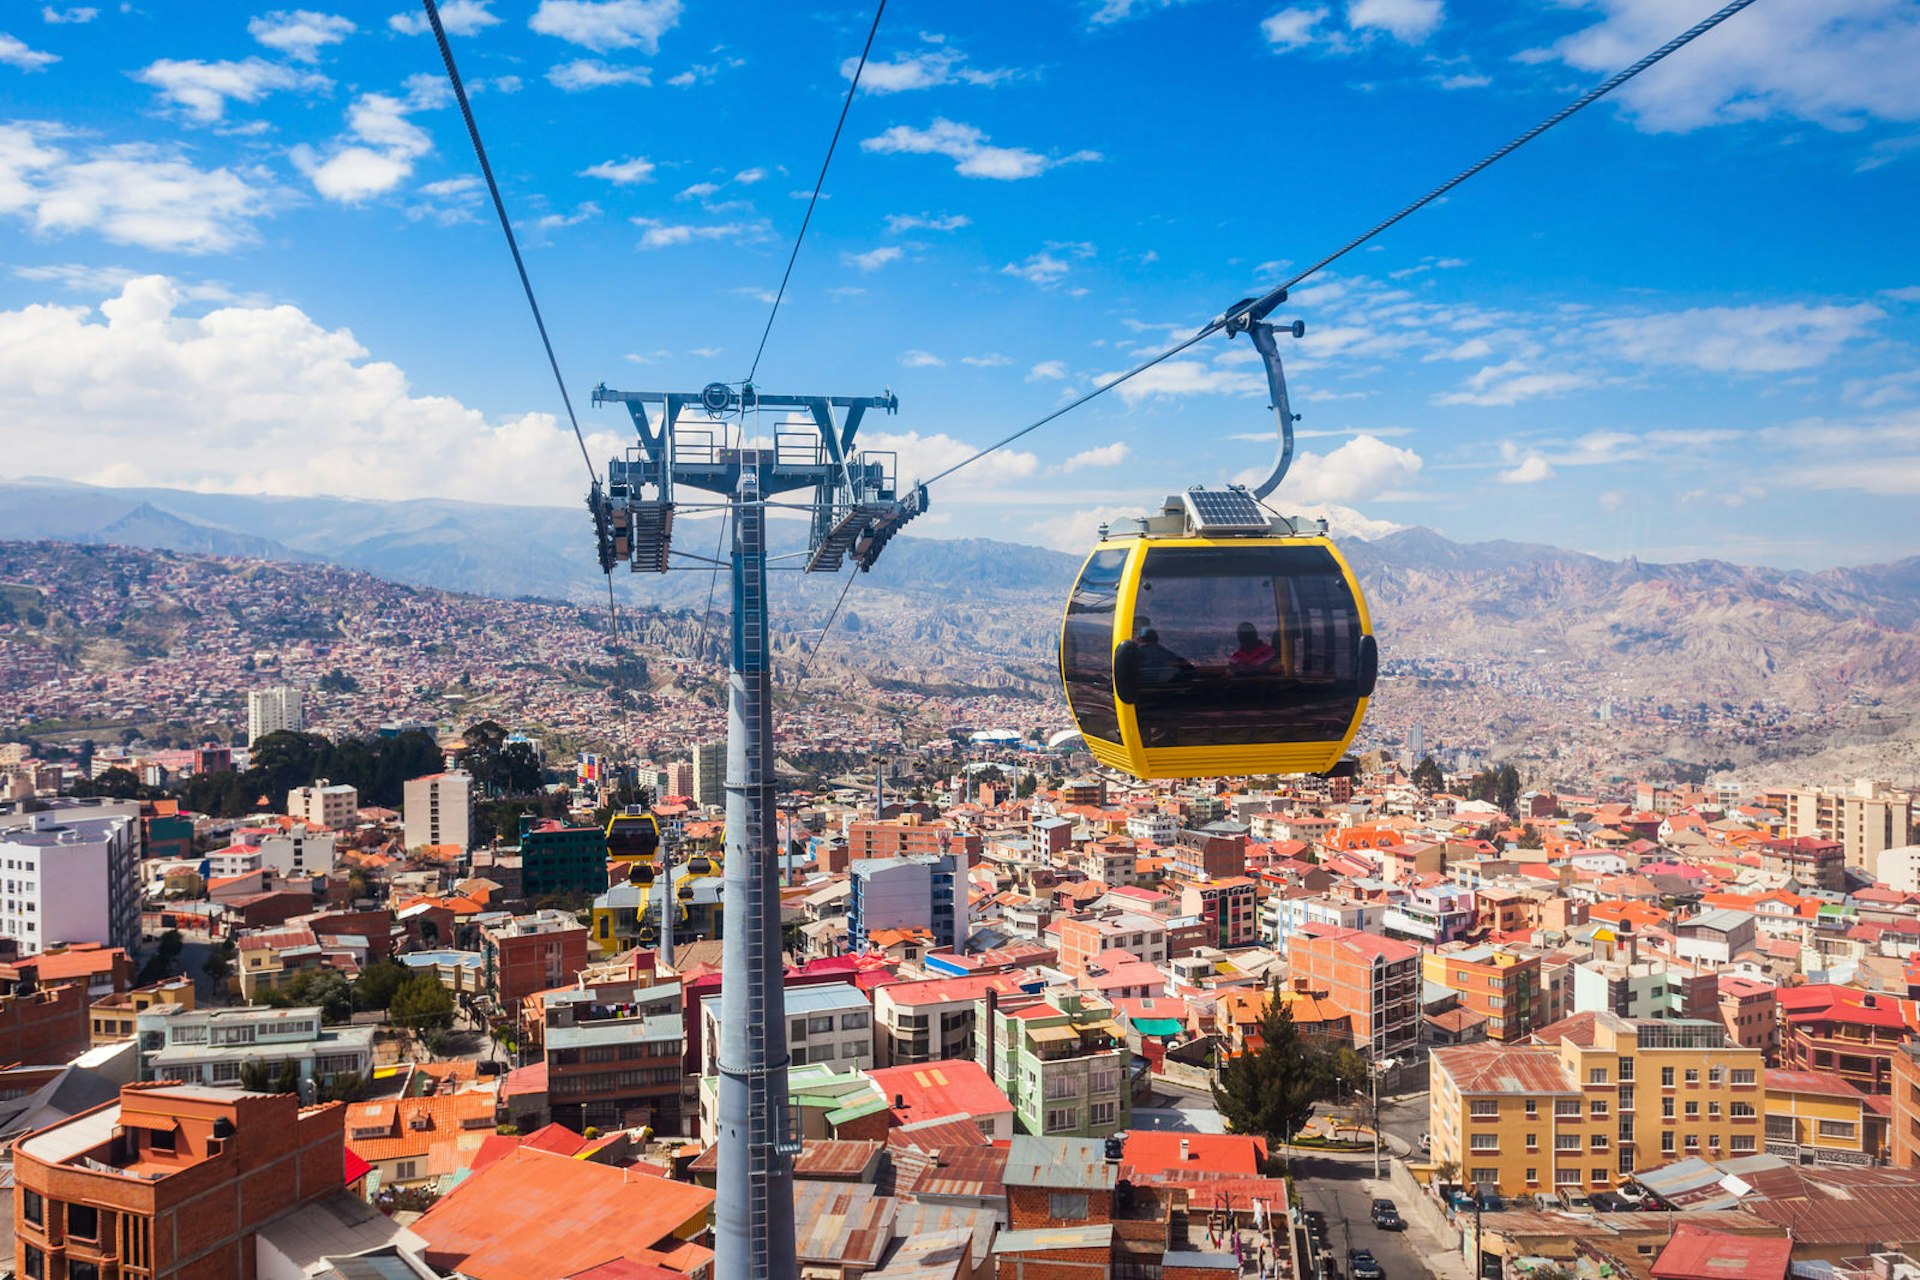 A yellow cable car hangs above the city of La Paz, Bolivia